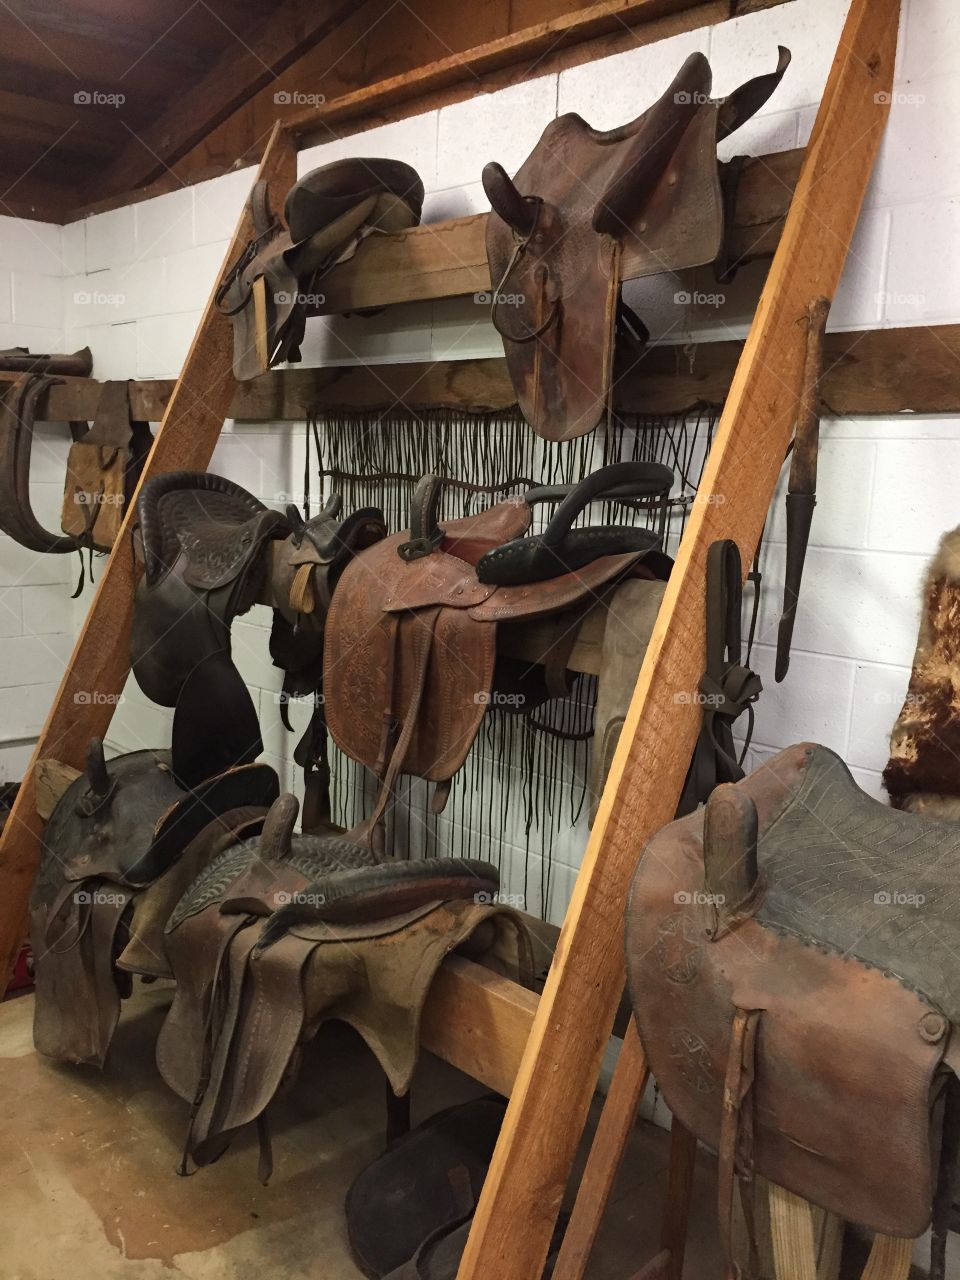 More early saddles